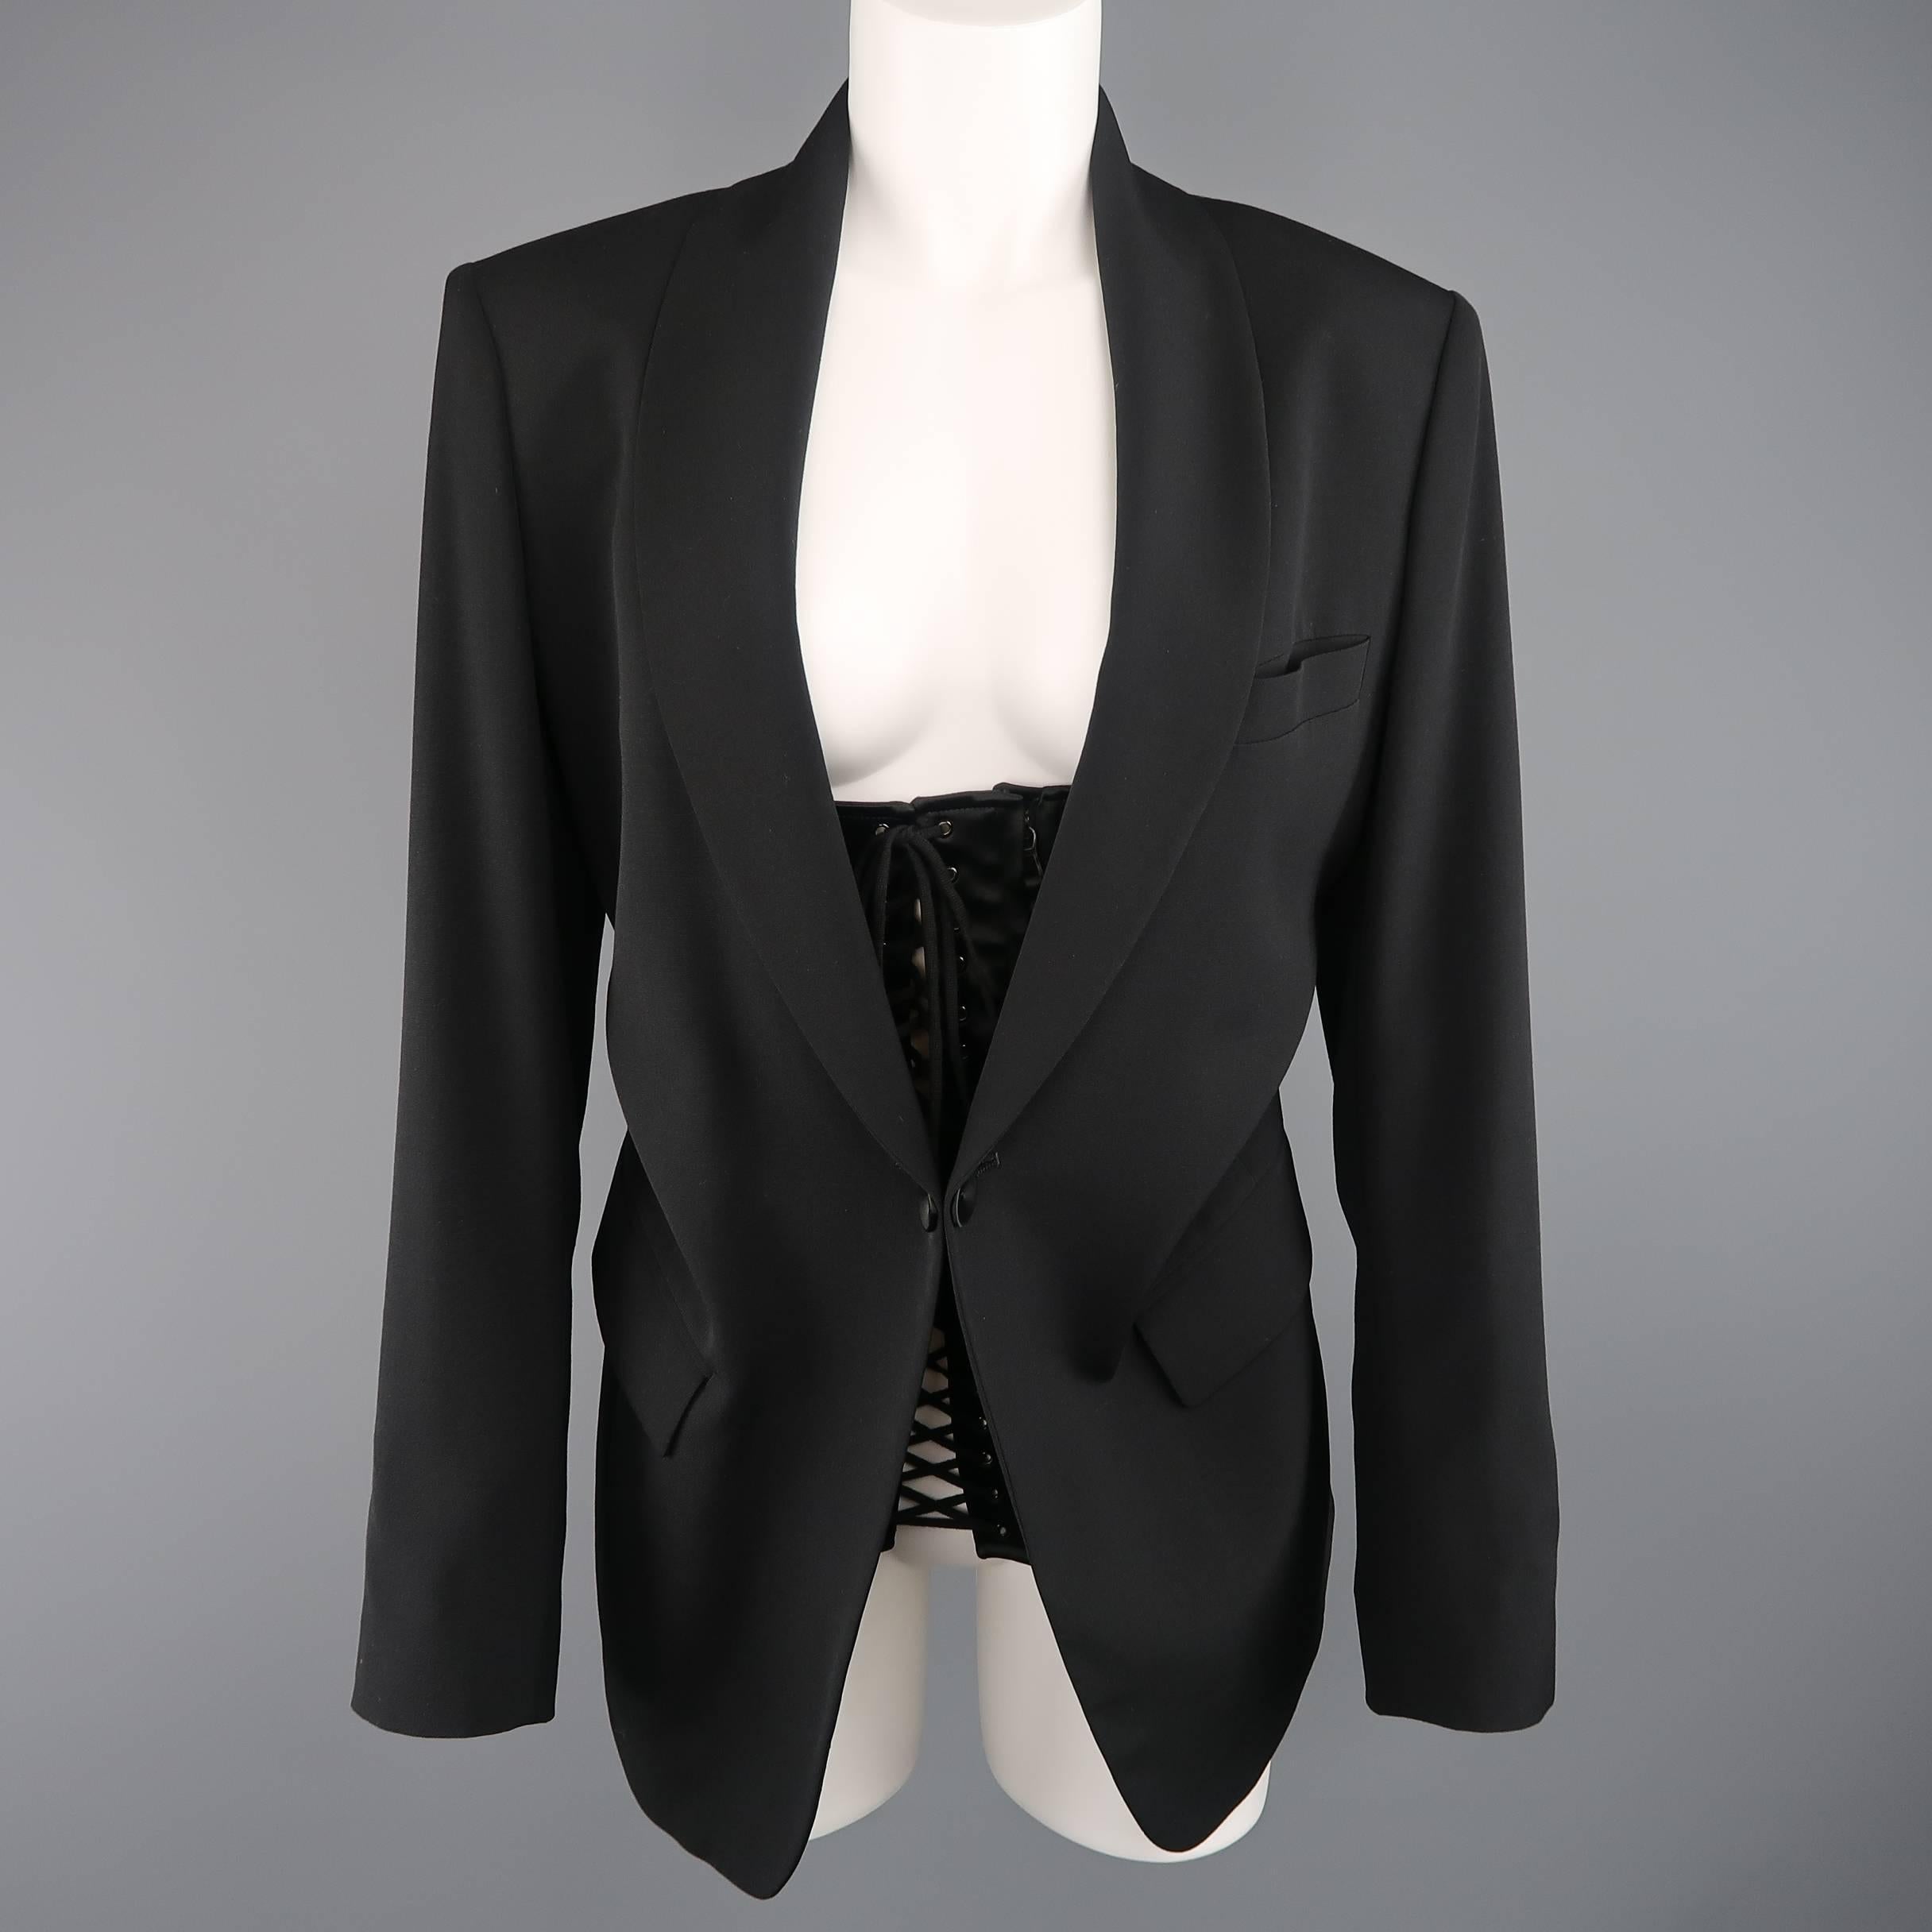 This fabulous JEAN PAUL GAULTIER jacket comes in a light weight black wool and features a shawl collar, single button front, functional button cuffs, and triple lace up satin bustier front with zip closure. Made in Italy.
 
Excellent Pre-Owned